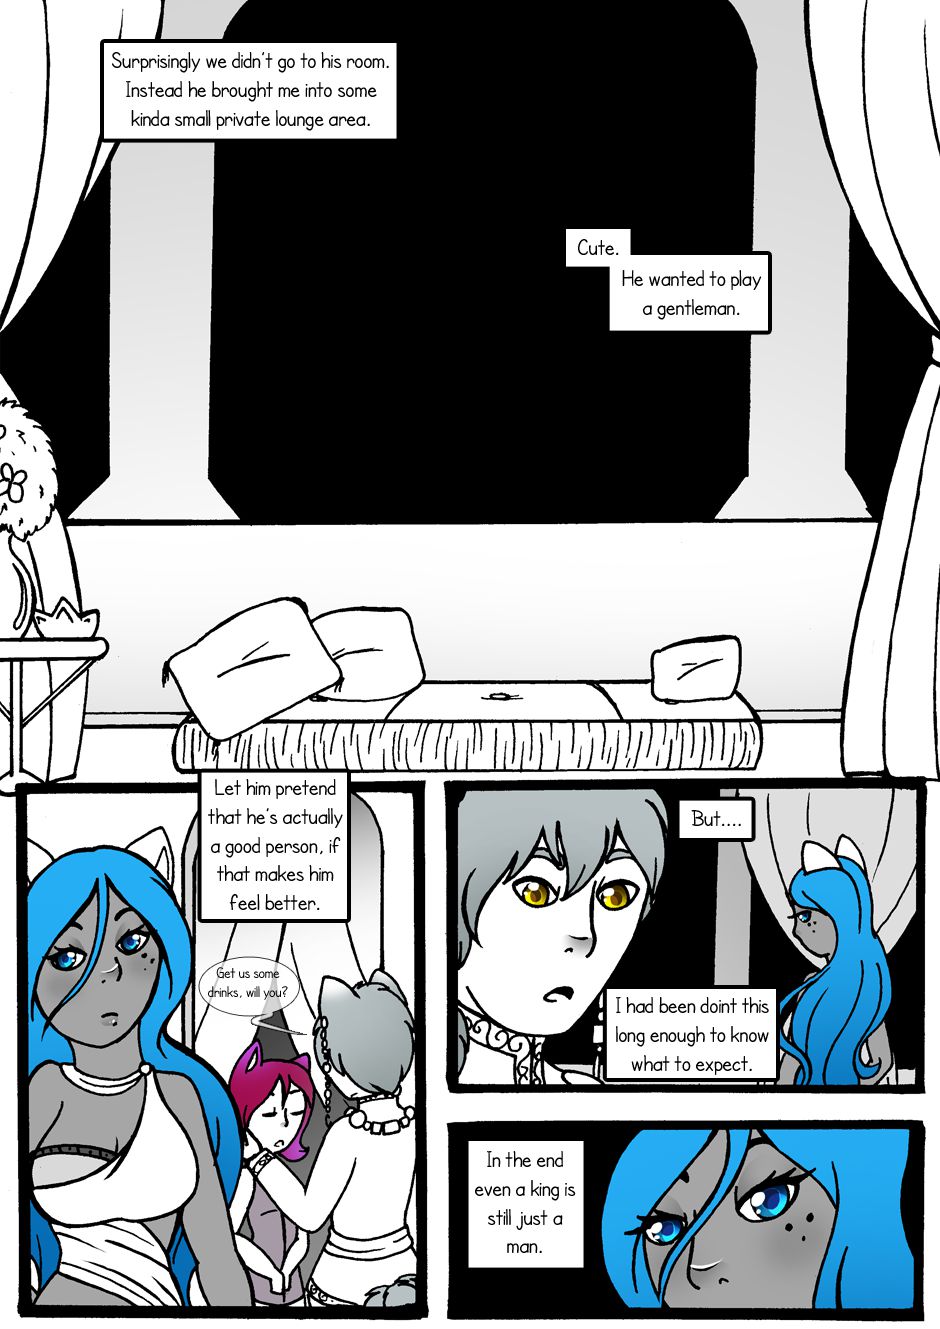 [Jeny-jen94] Between Kings and Queens [Ongoing] 36